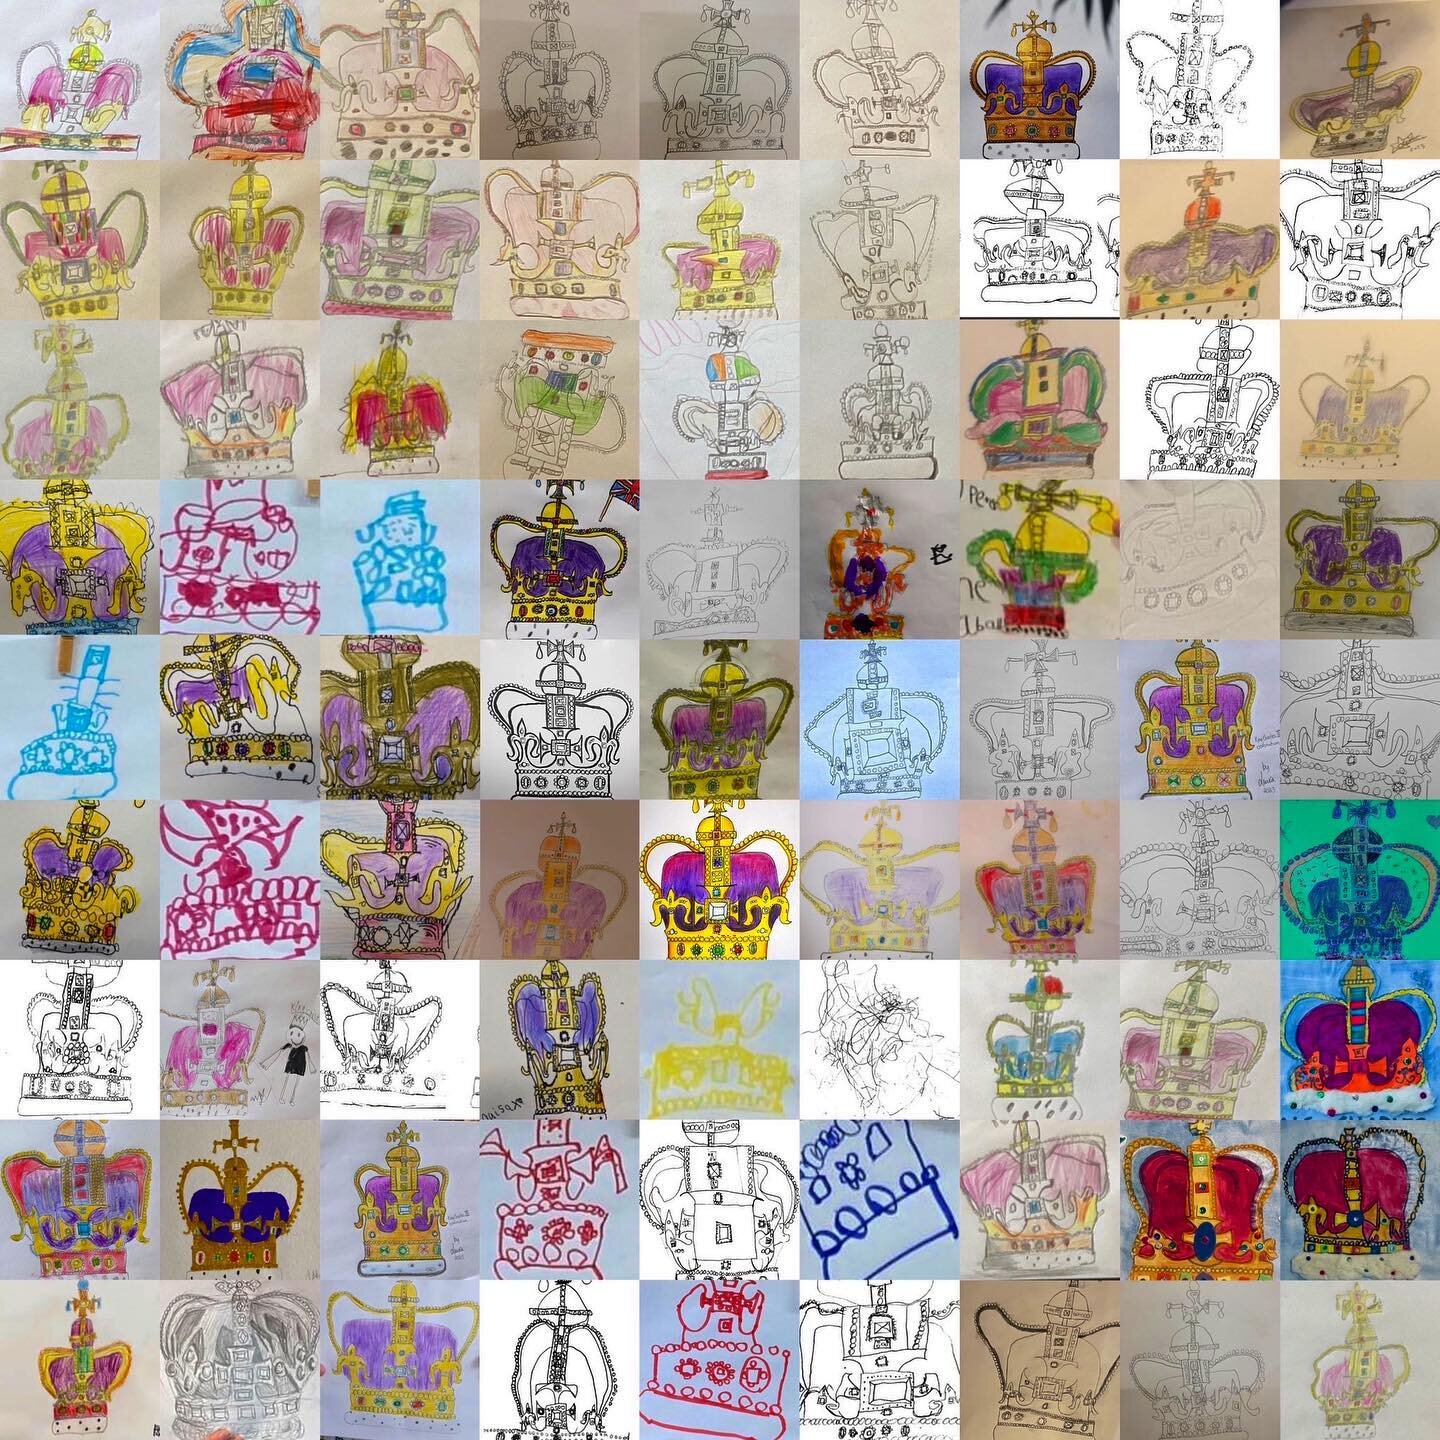 I thought it would be nice to finish the day with this week&rsquo;s #DrawWithRob #coronation GRID. I have been sent thousands of AMAZING drawings of St Edward&rsquo;s Crown over the last week (this is just a random selection) and I want to say a huge